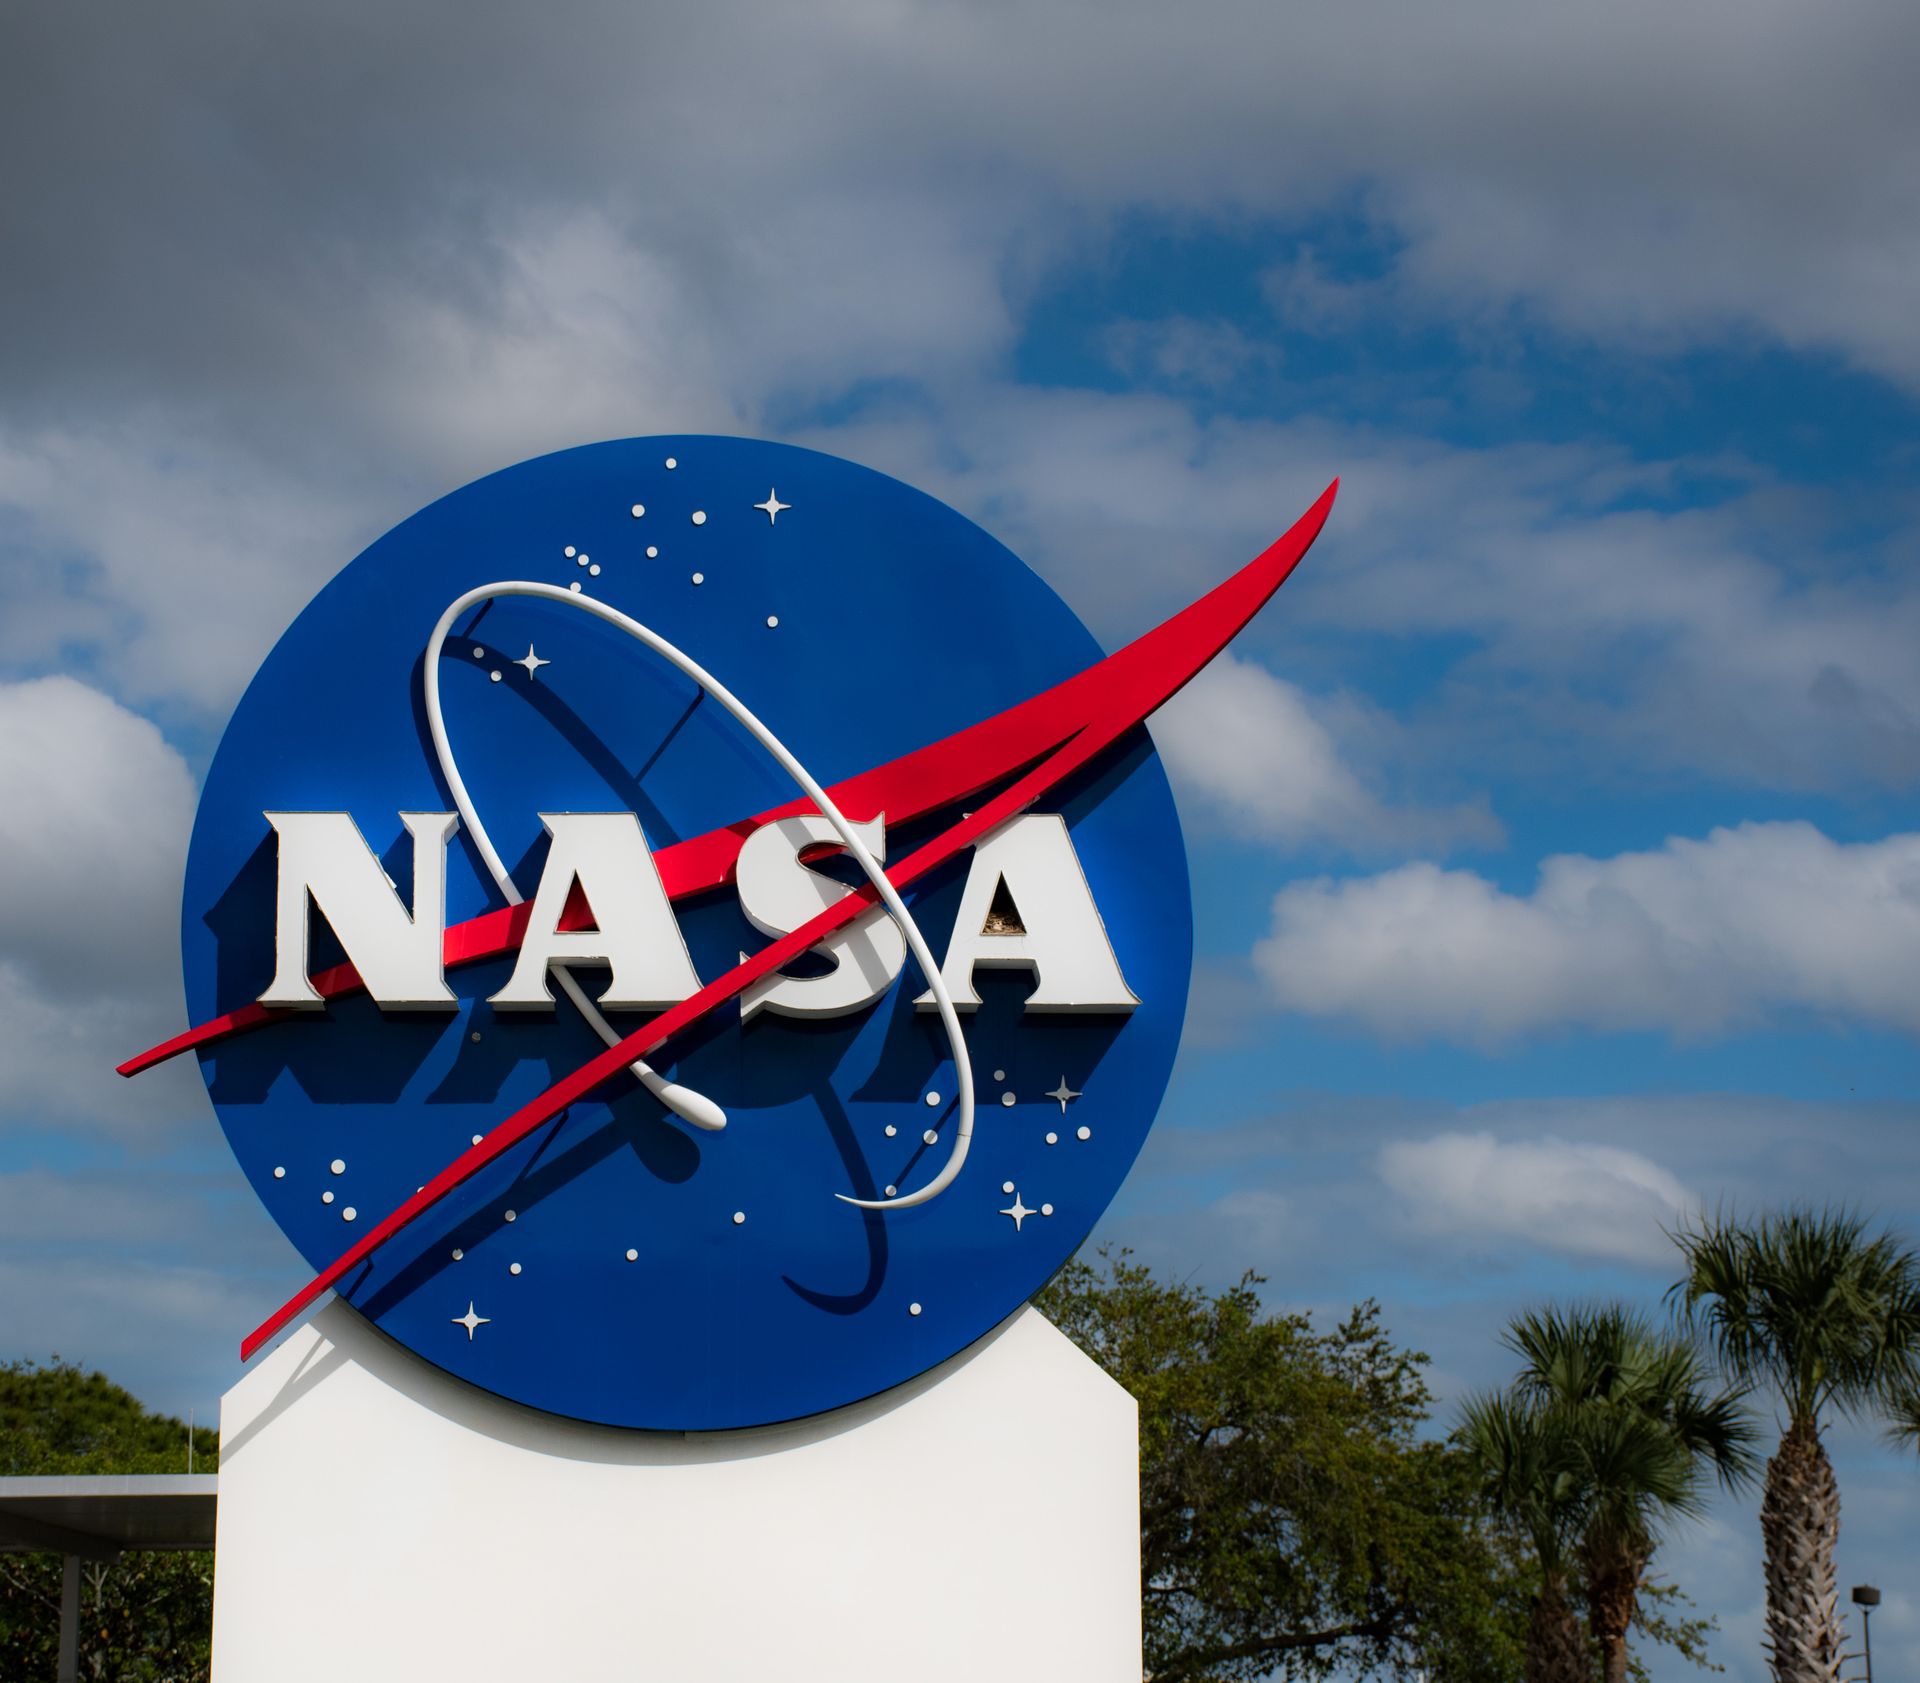 A large nasa sign against a cloudy sky